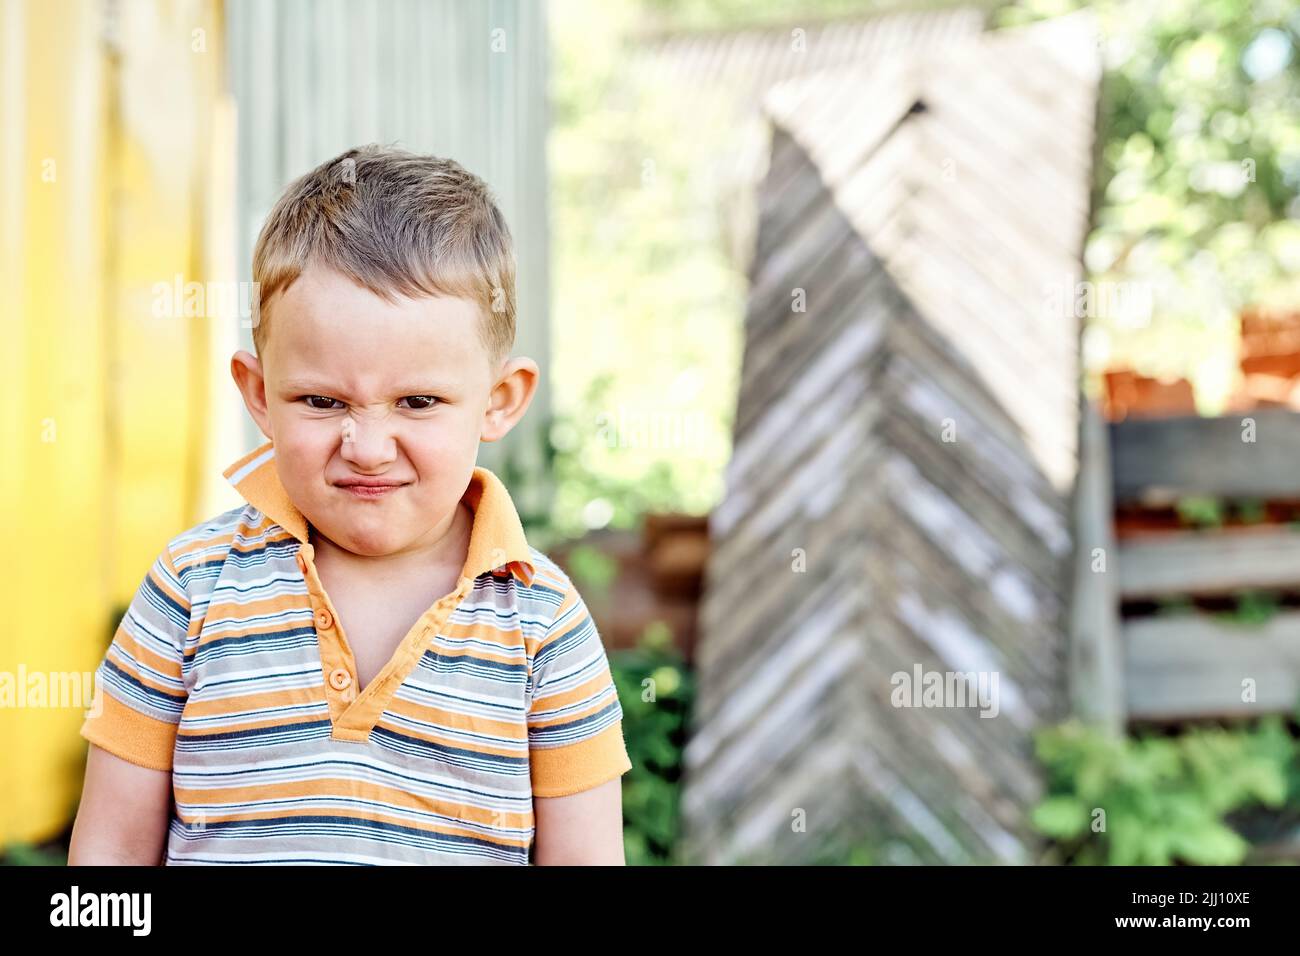 Little boy shows grimaces standing in yard on blurred background. Portrait of blond toddler against lush green bushes on sunny day in countryside Stock Photo